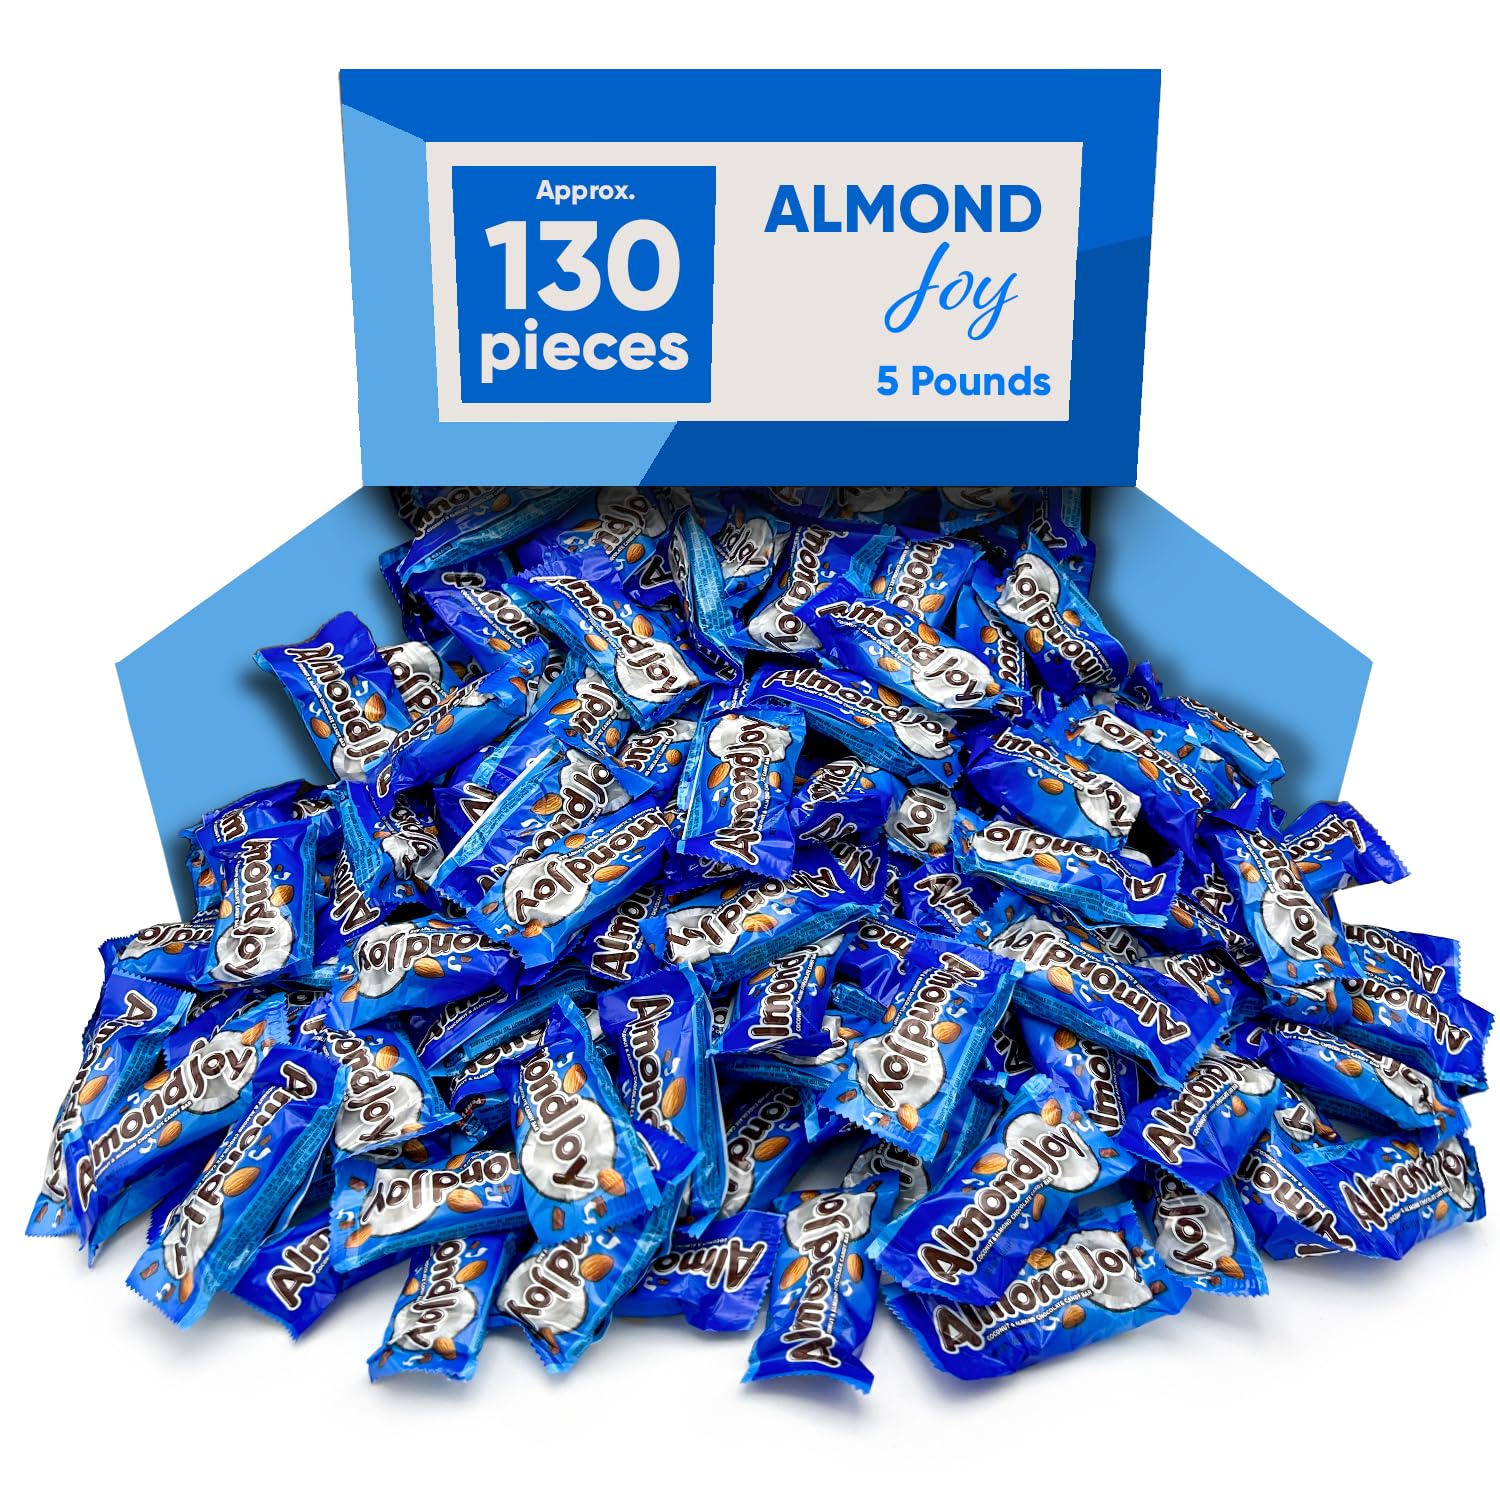 Almond Joy Bars 5LB Bulk Milk Chocolate Coconut Filled Snack Size Treats Individualy Wrapped Candy Bars (5 Pounds) - $19.99 at CJ Sweets via Amazon